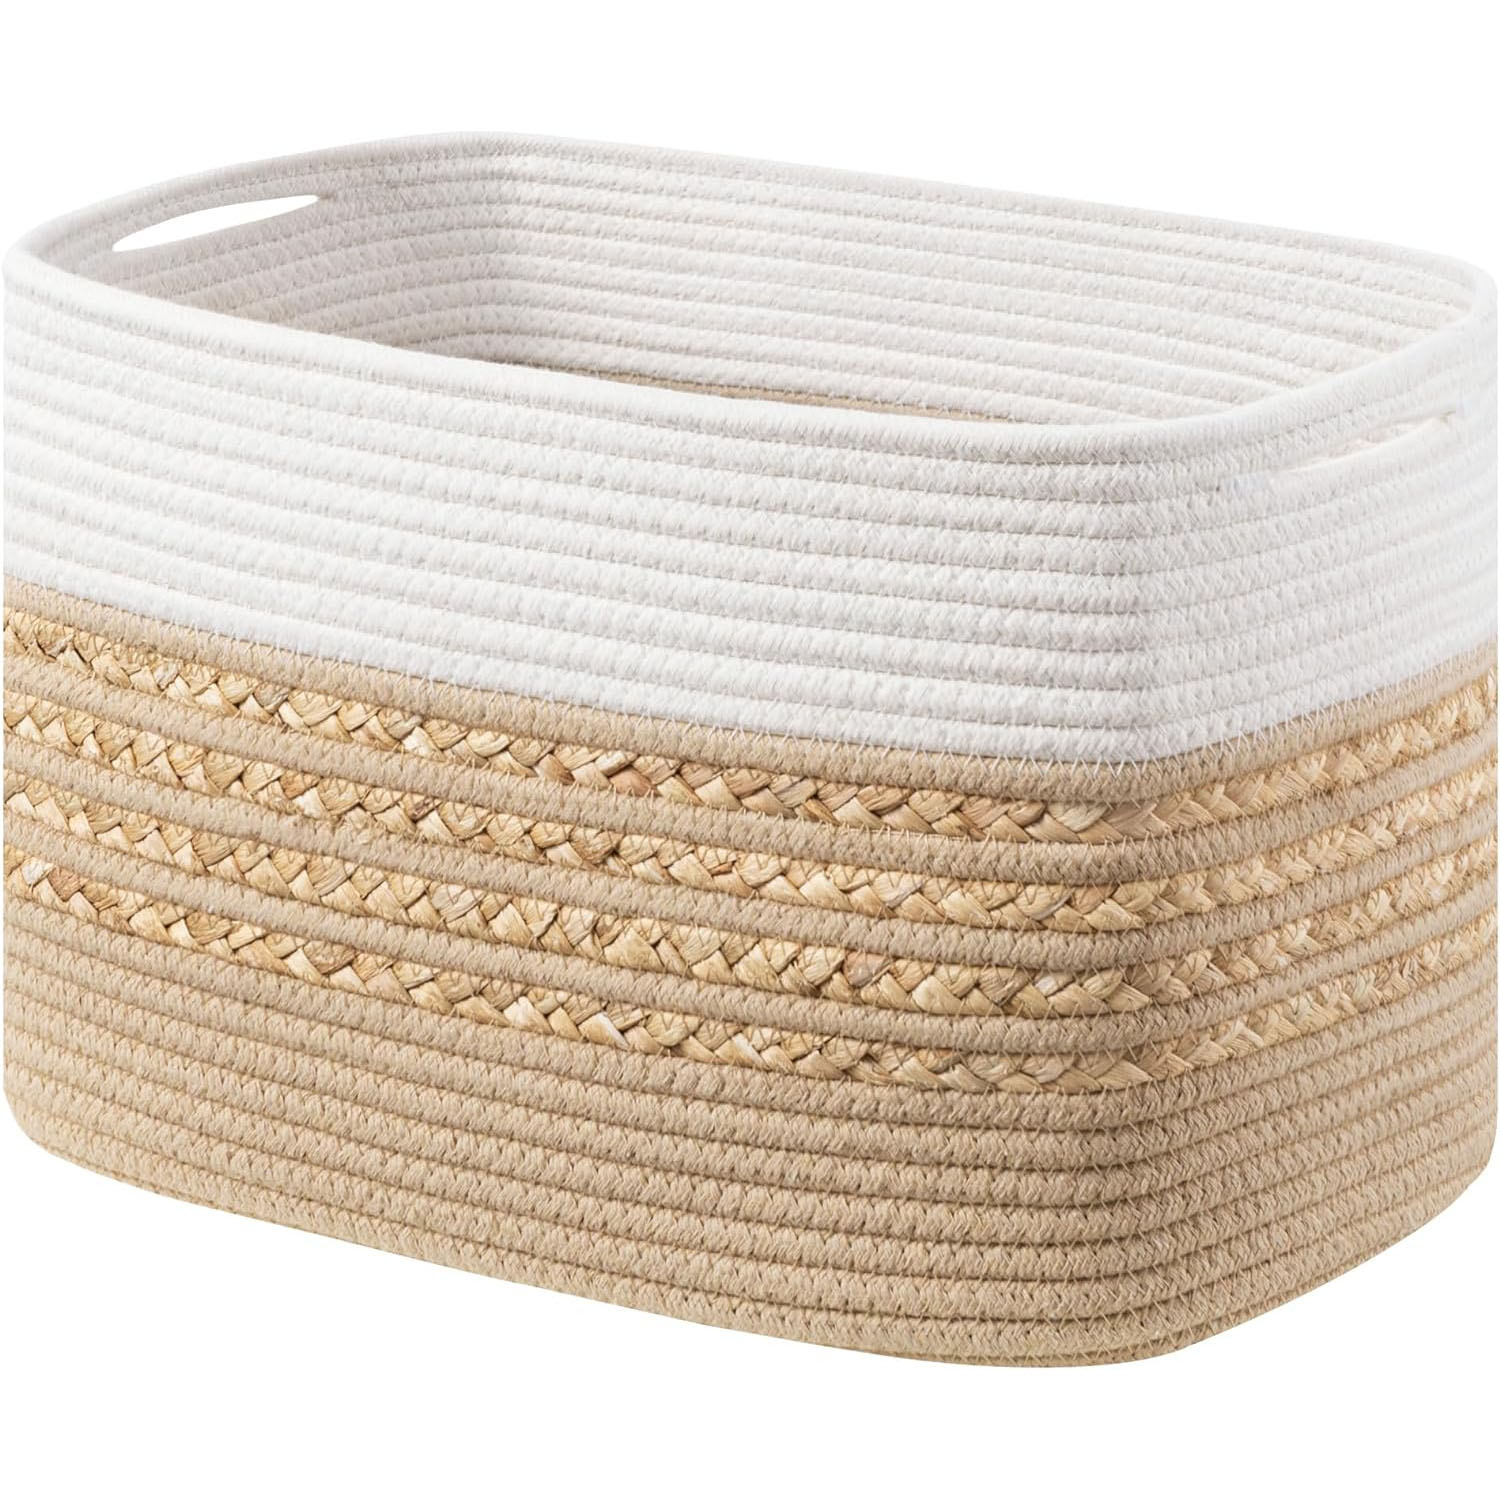 Rectangle Cotton Rope Basket with Handles